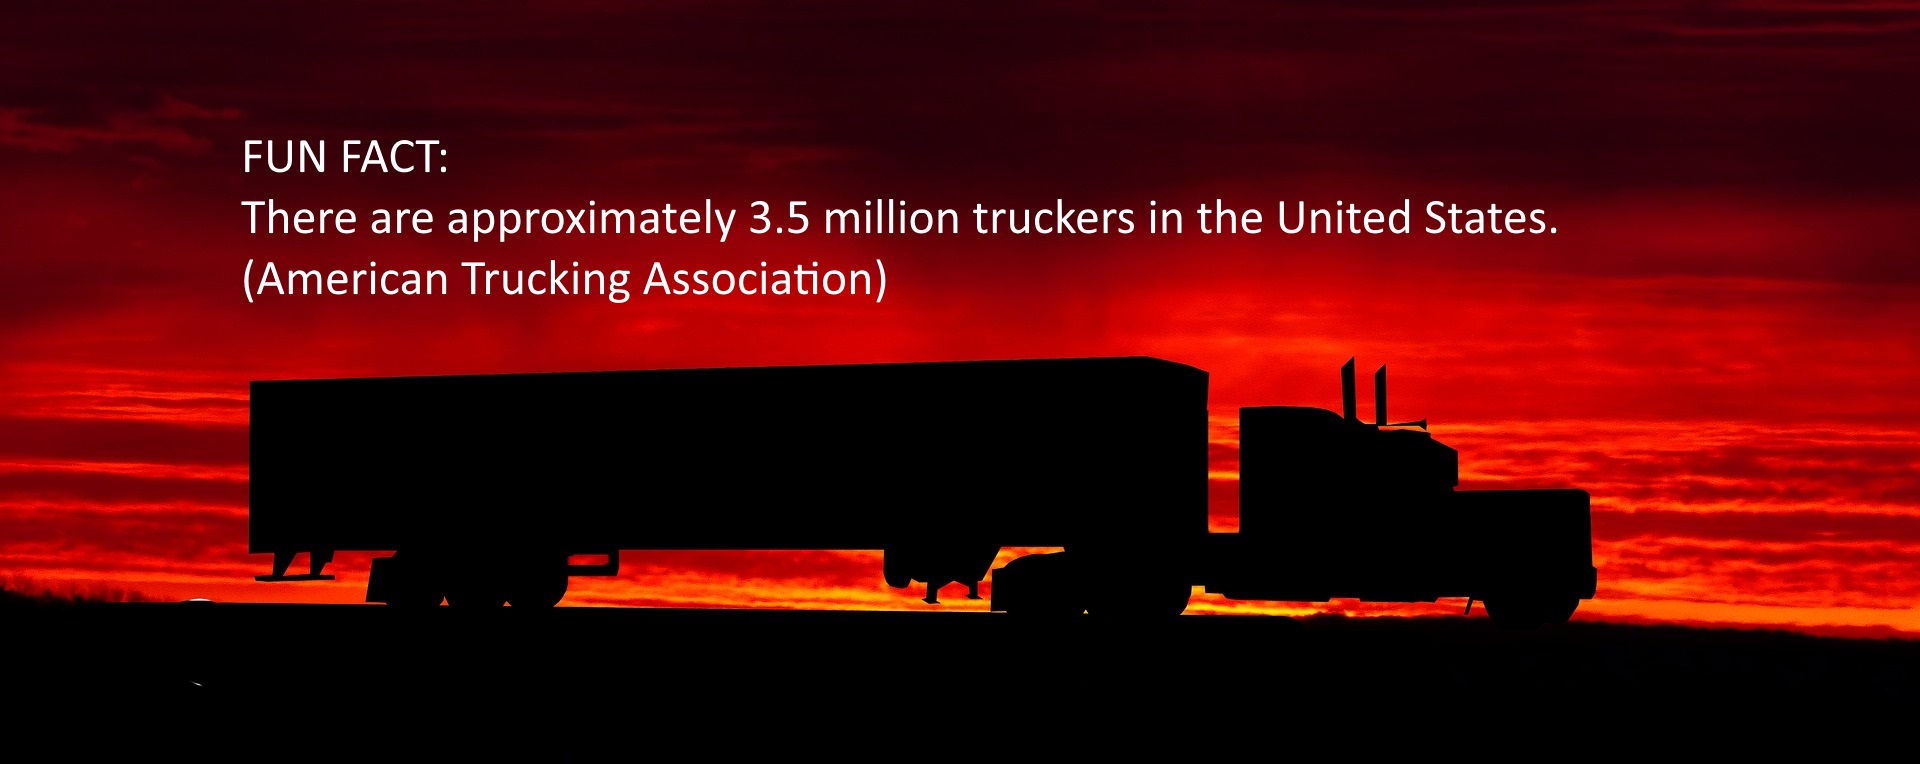 Picture of a truck with the words, "Fun Fact: There are approximately 3.5 million truckers in the United States according to the American Trucking Association